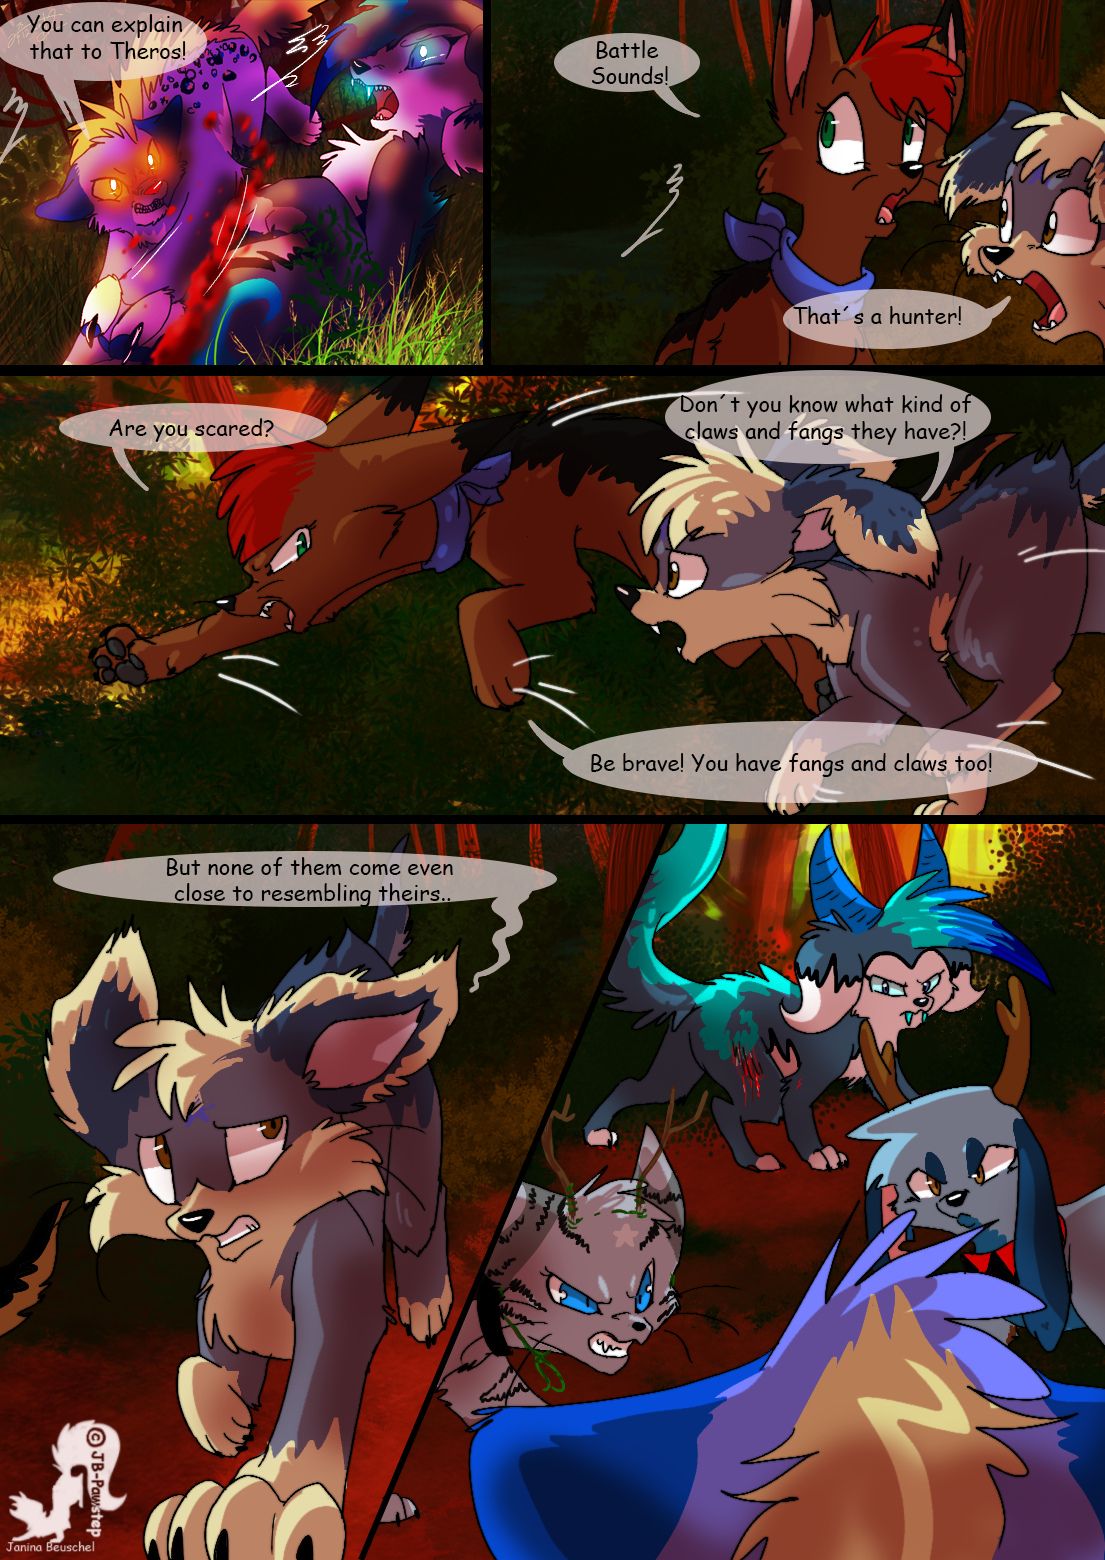 Chapter 13 - On Patrol with Antlers - Part 2